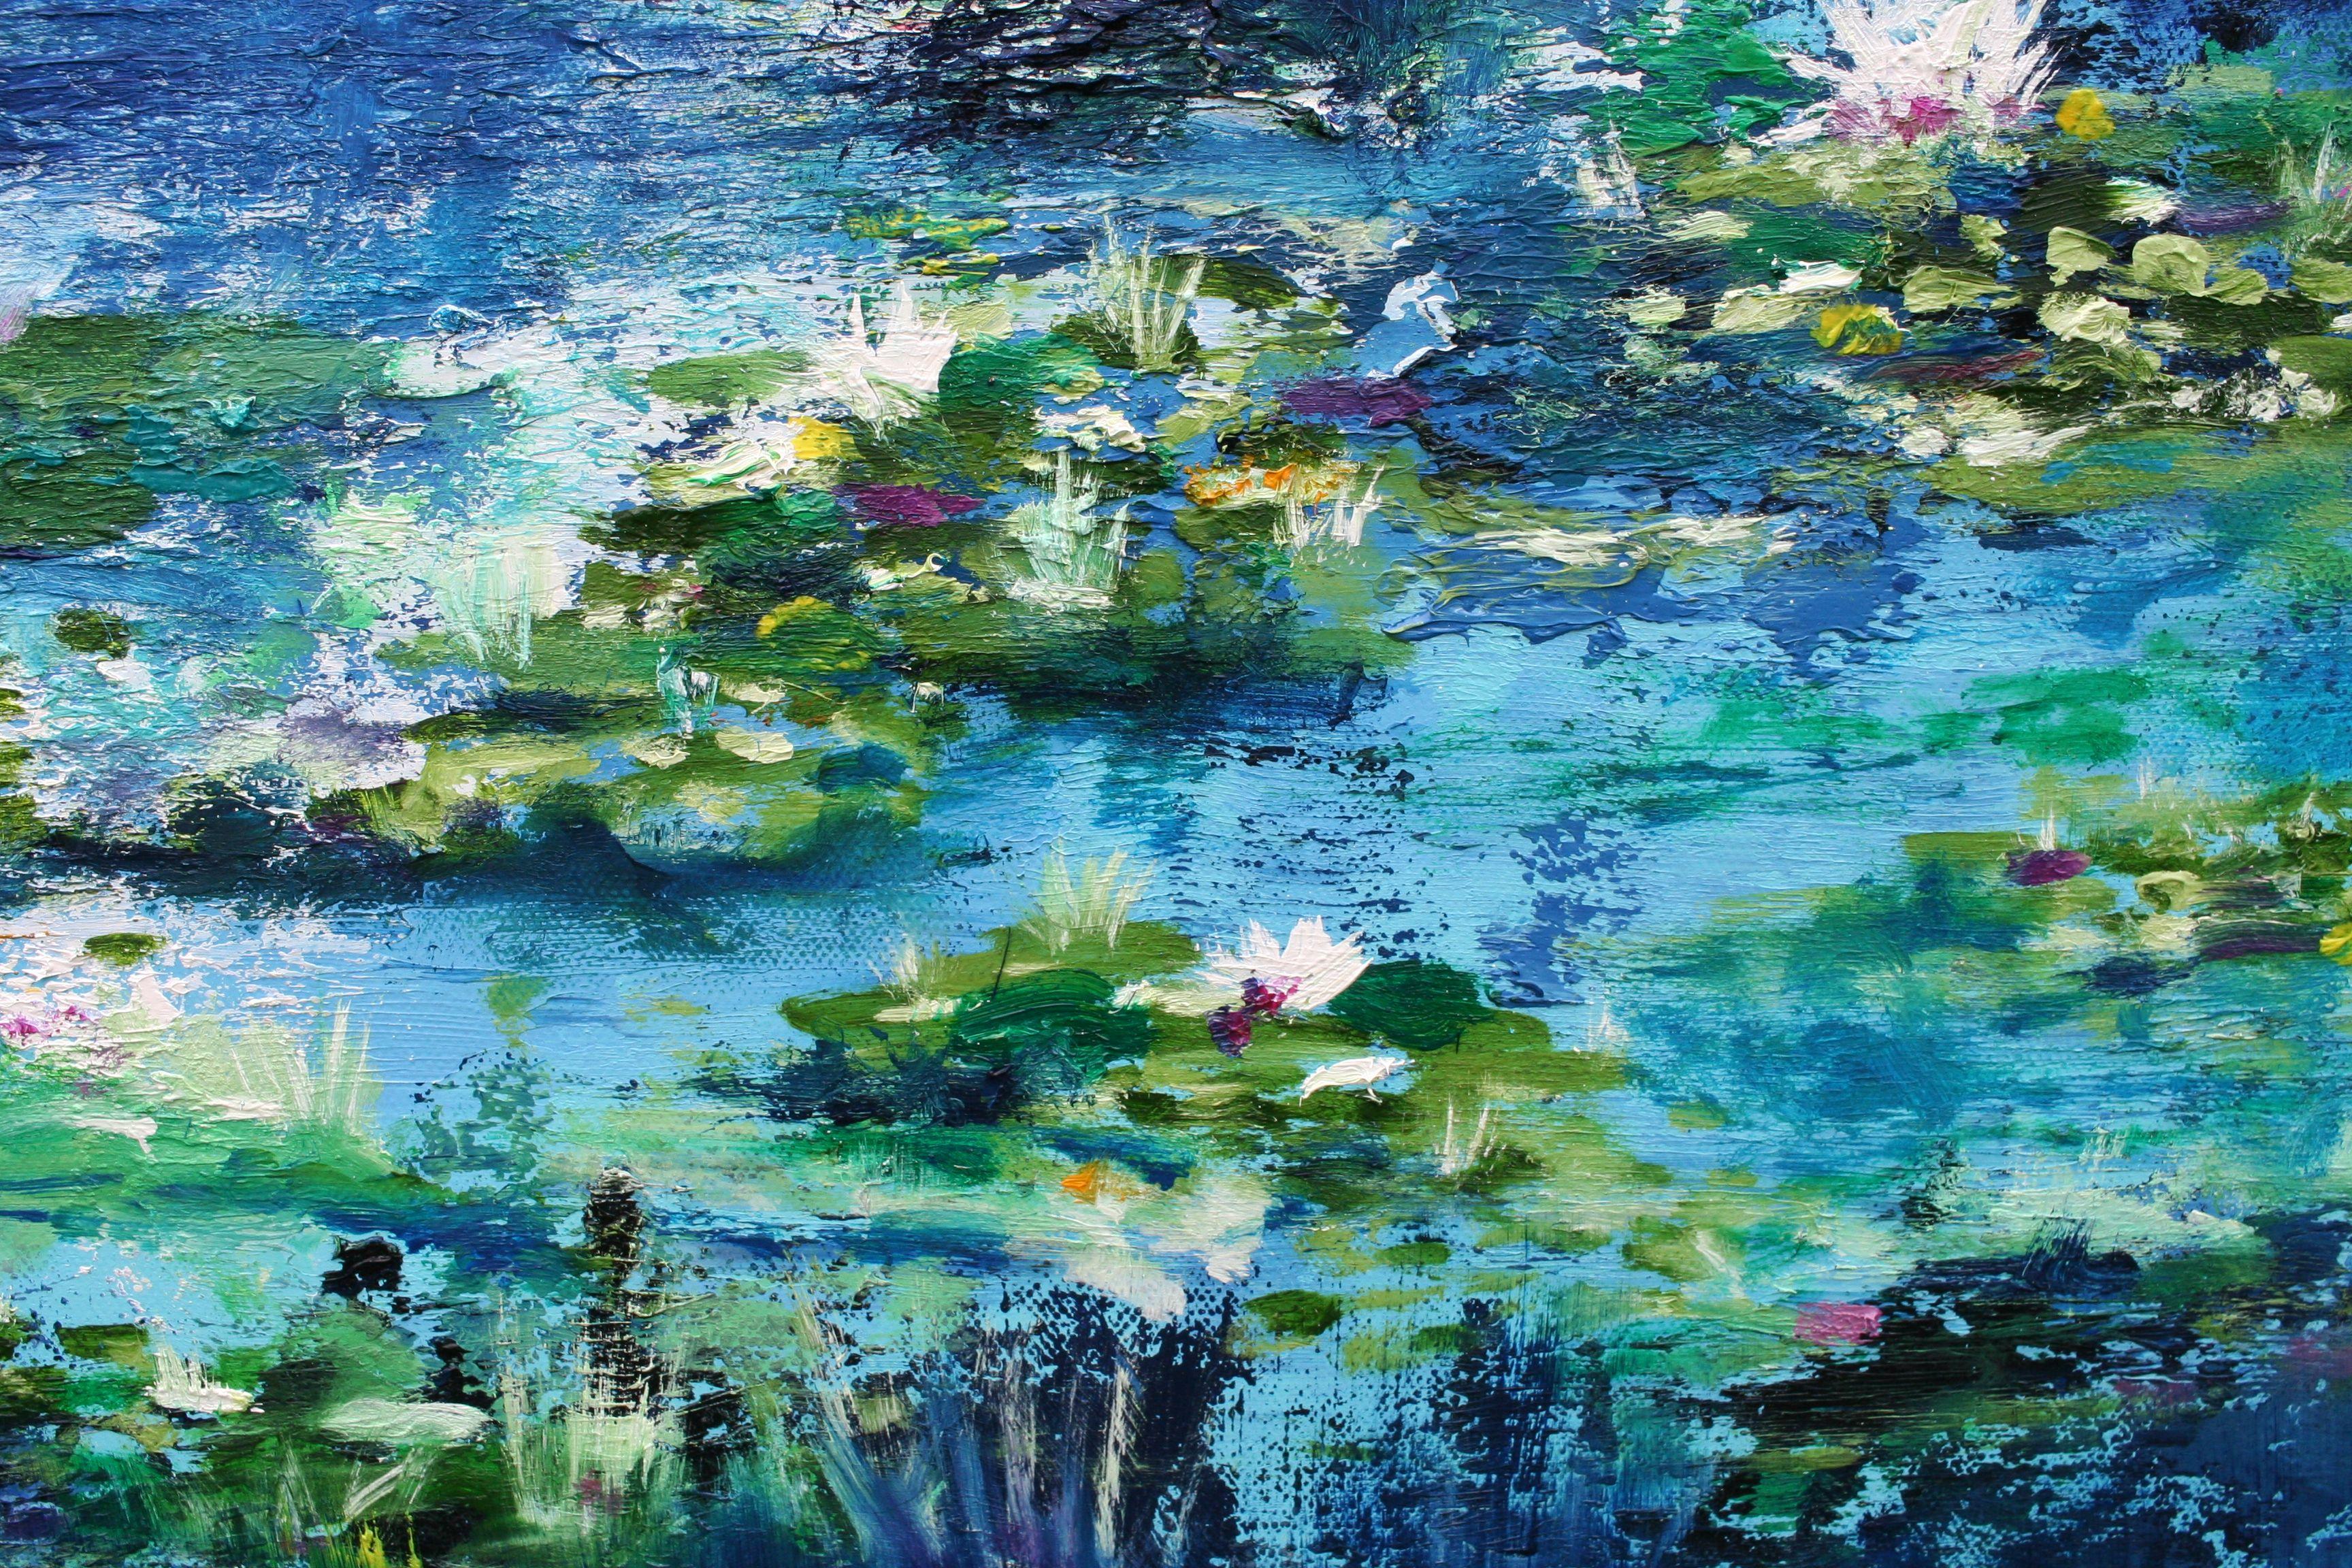 Large Water Lilies 120 x 80 cm Oil Painting    Size 120 x 80 cms  Professional Heavy Duty 45mm Canvas  Edges Painted White - Ready to Hang Varnished for protection  Rooms for reference    Signed, dated and titled. Original artwork with signed